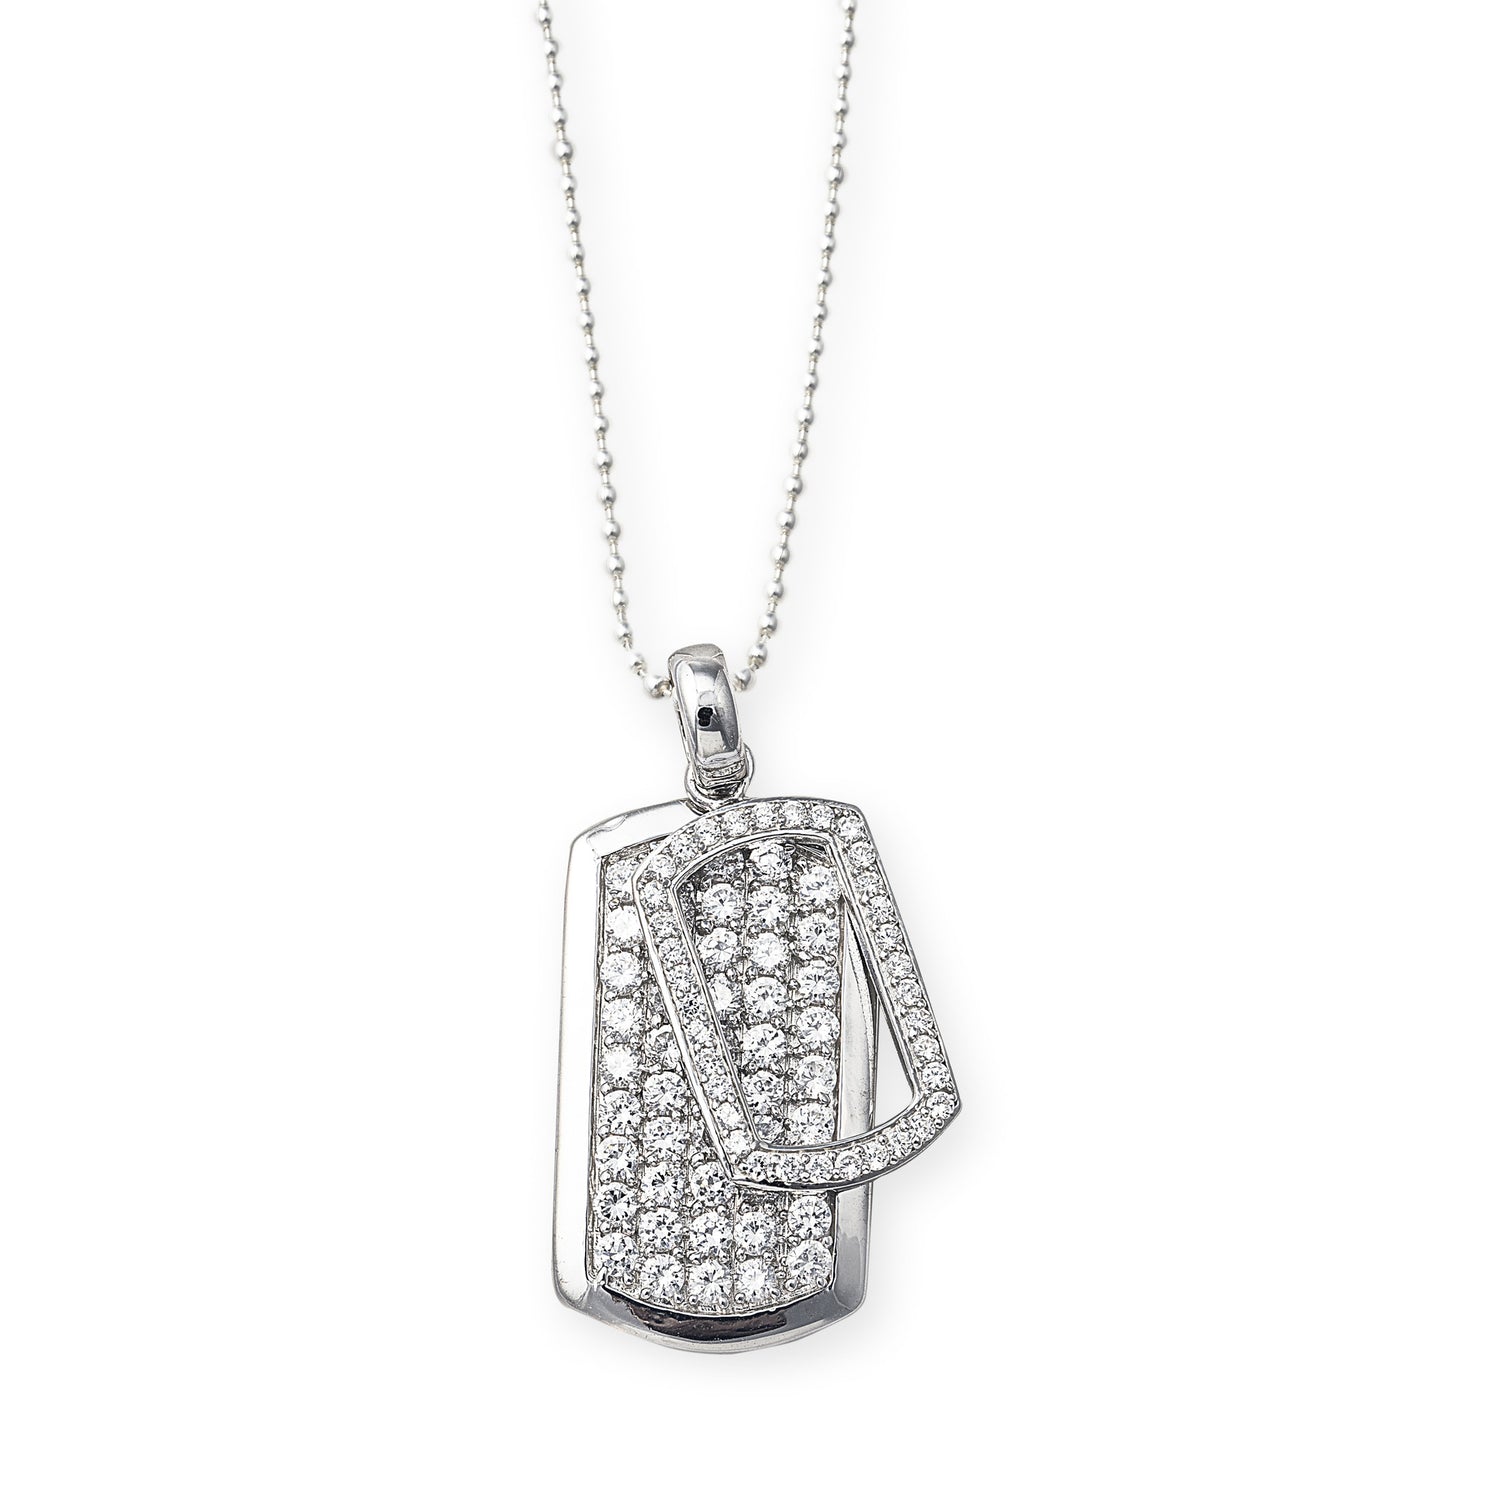 The High Bling Tag Necklace in 925 Sterling Silver and Cubic Zirconia Stones. Big on Bling! Worldwide Shipping. Affordable luxury jewellery by Bellagio & Co.